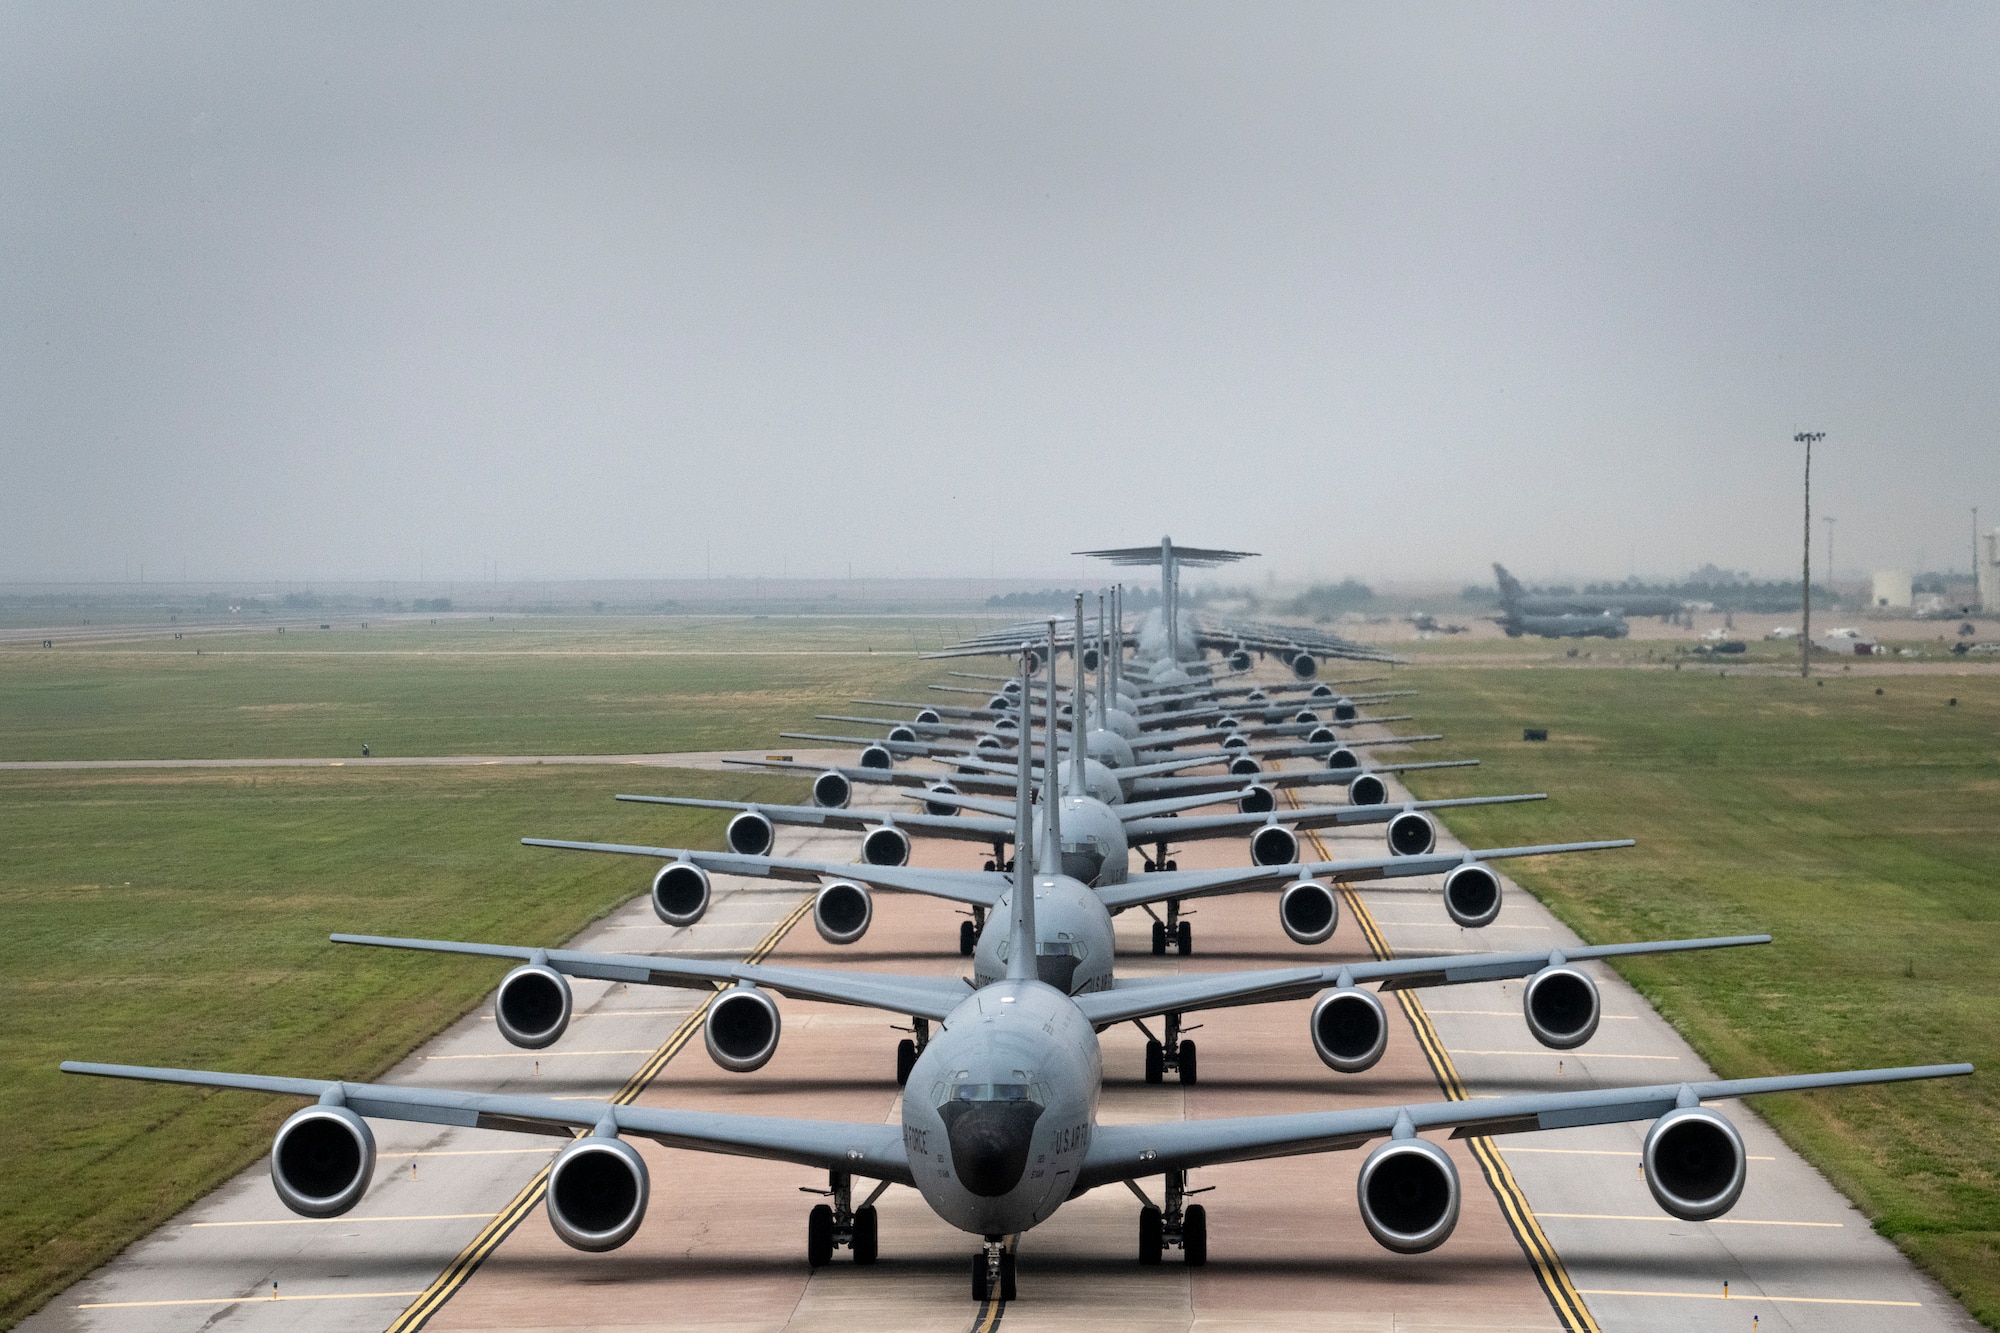 U.S. Air Force KC-135 Stratotankers, C-17 Globemaster IIIs and KC-46 Pegasus aircraft line up for an elephant walk at Altus Air Force Base, Oklahoma, during a large formation exercise, May 21, 2020.